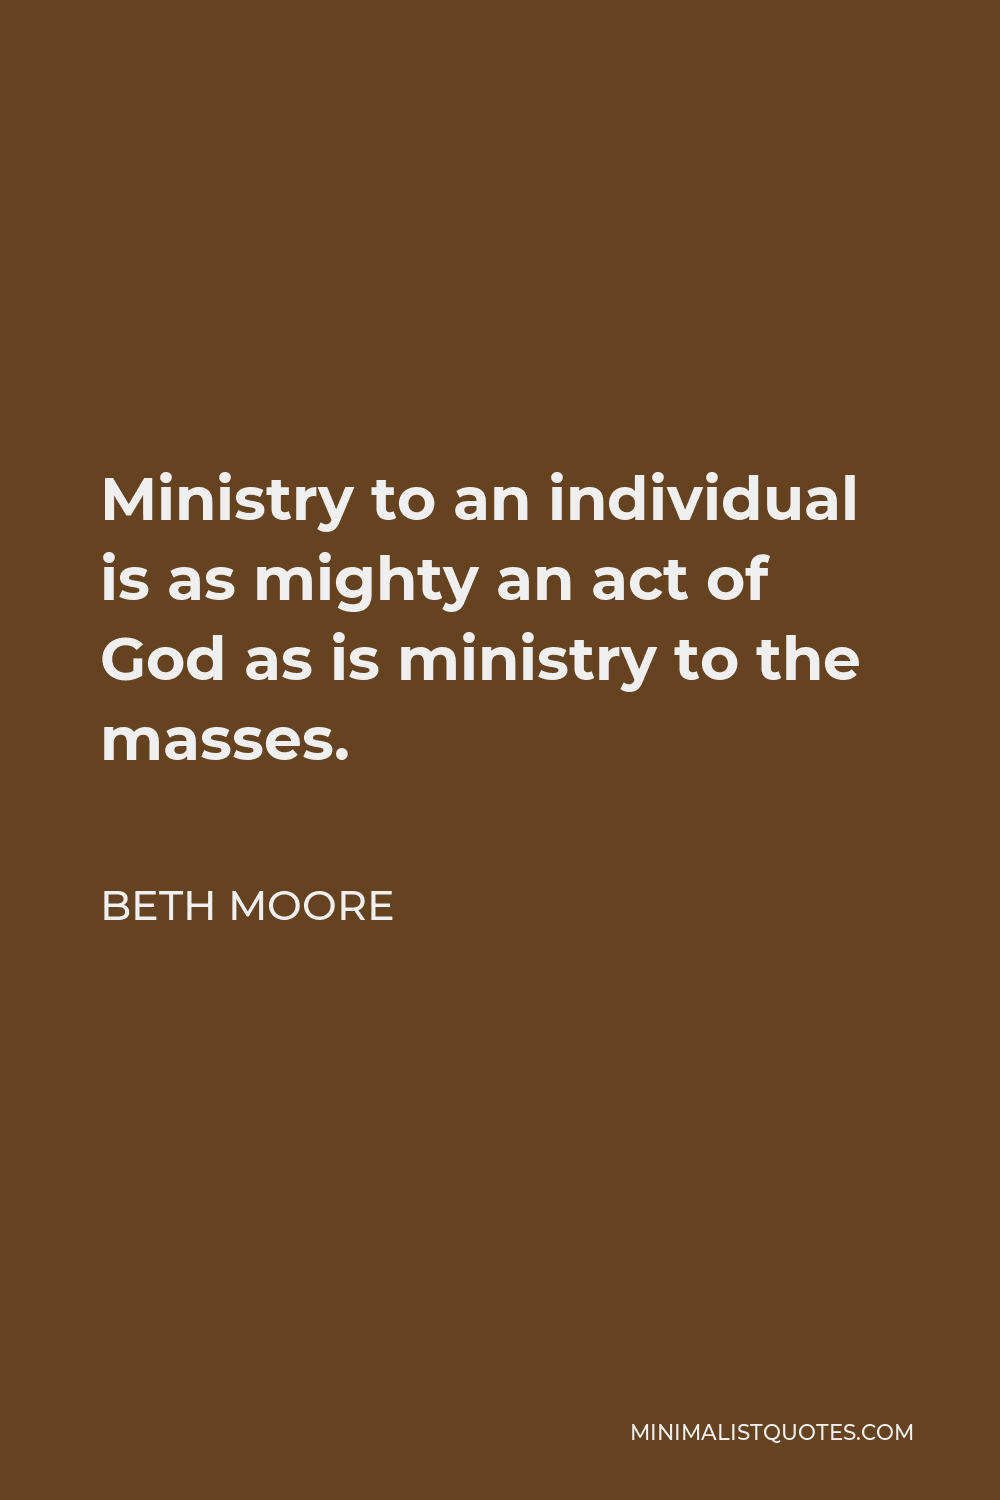 Beth Moore Quote - Ministry to an individual is as mighty an act of God as is ministry to the masses.